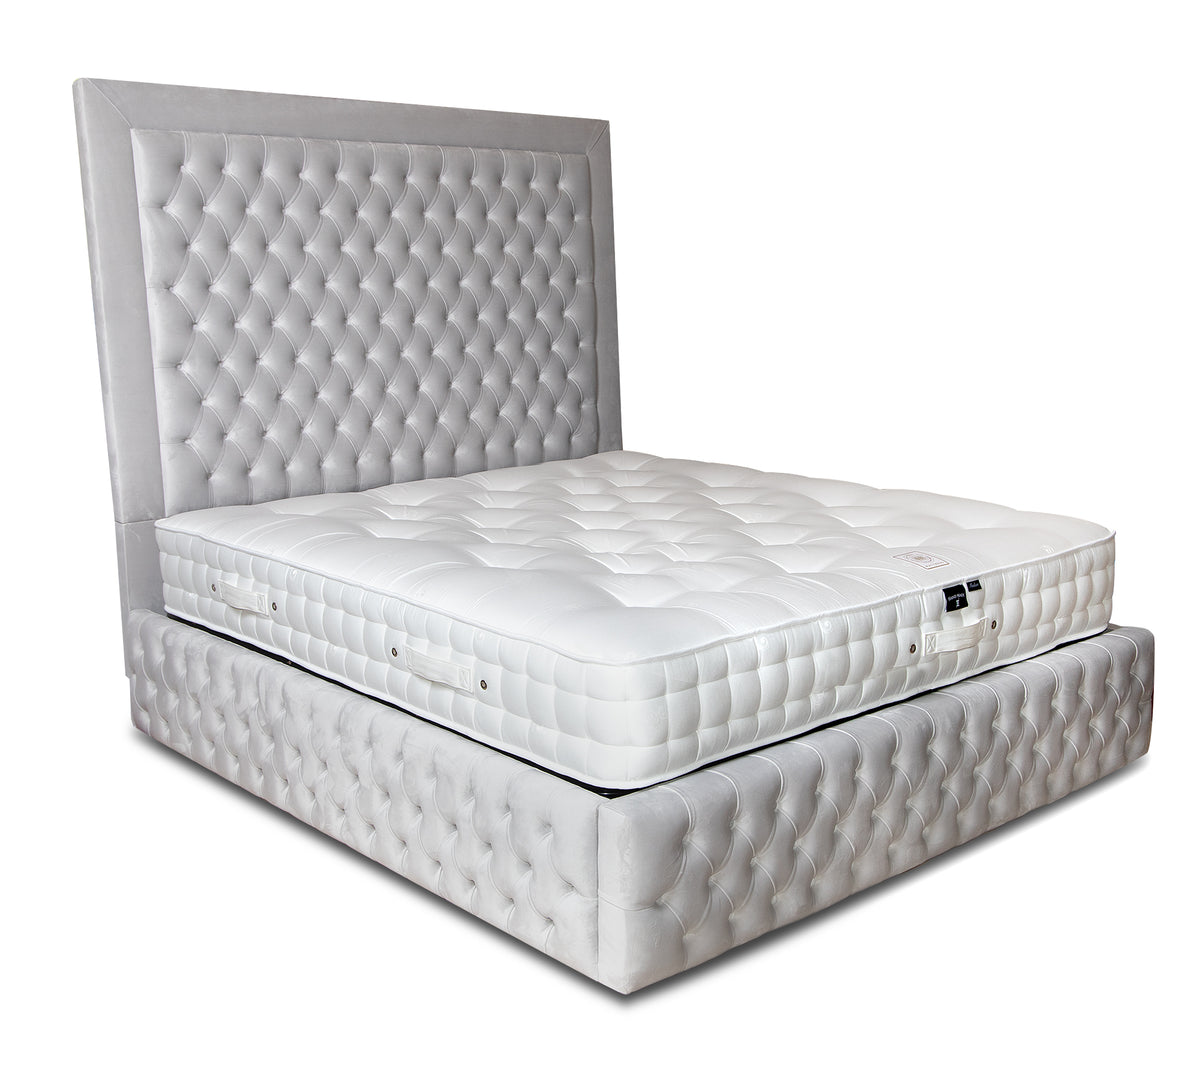 Eminence Chesterfield Bed Frame